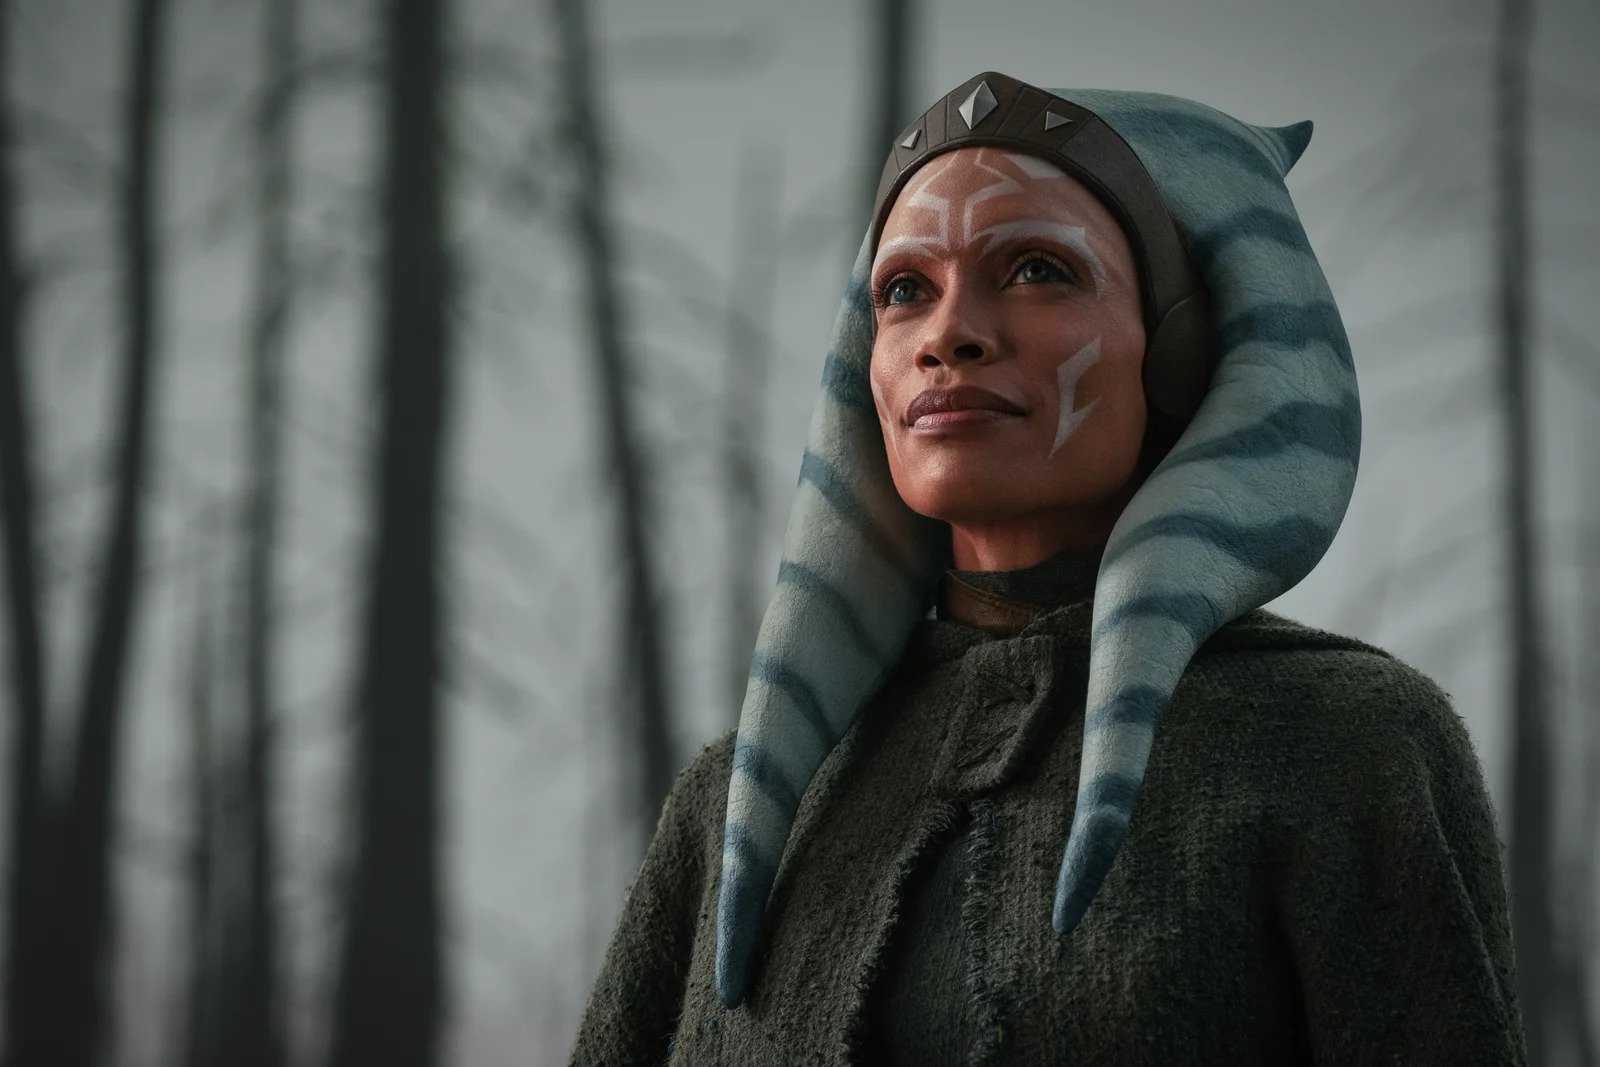 Star Wars spinoff series Ahsoka officially starts production and Lucasfilm shares the first BTS picture